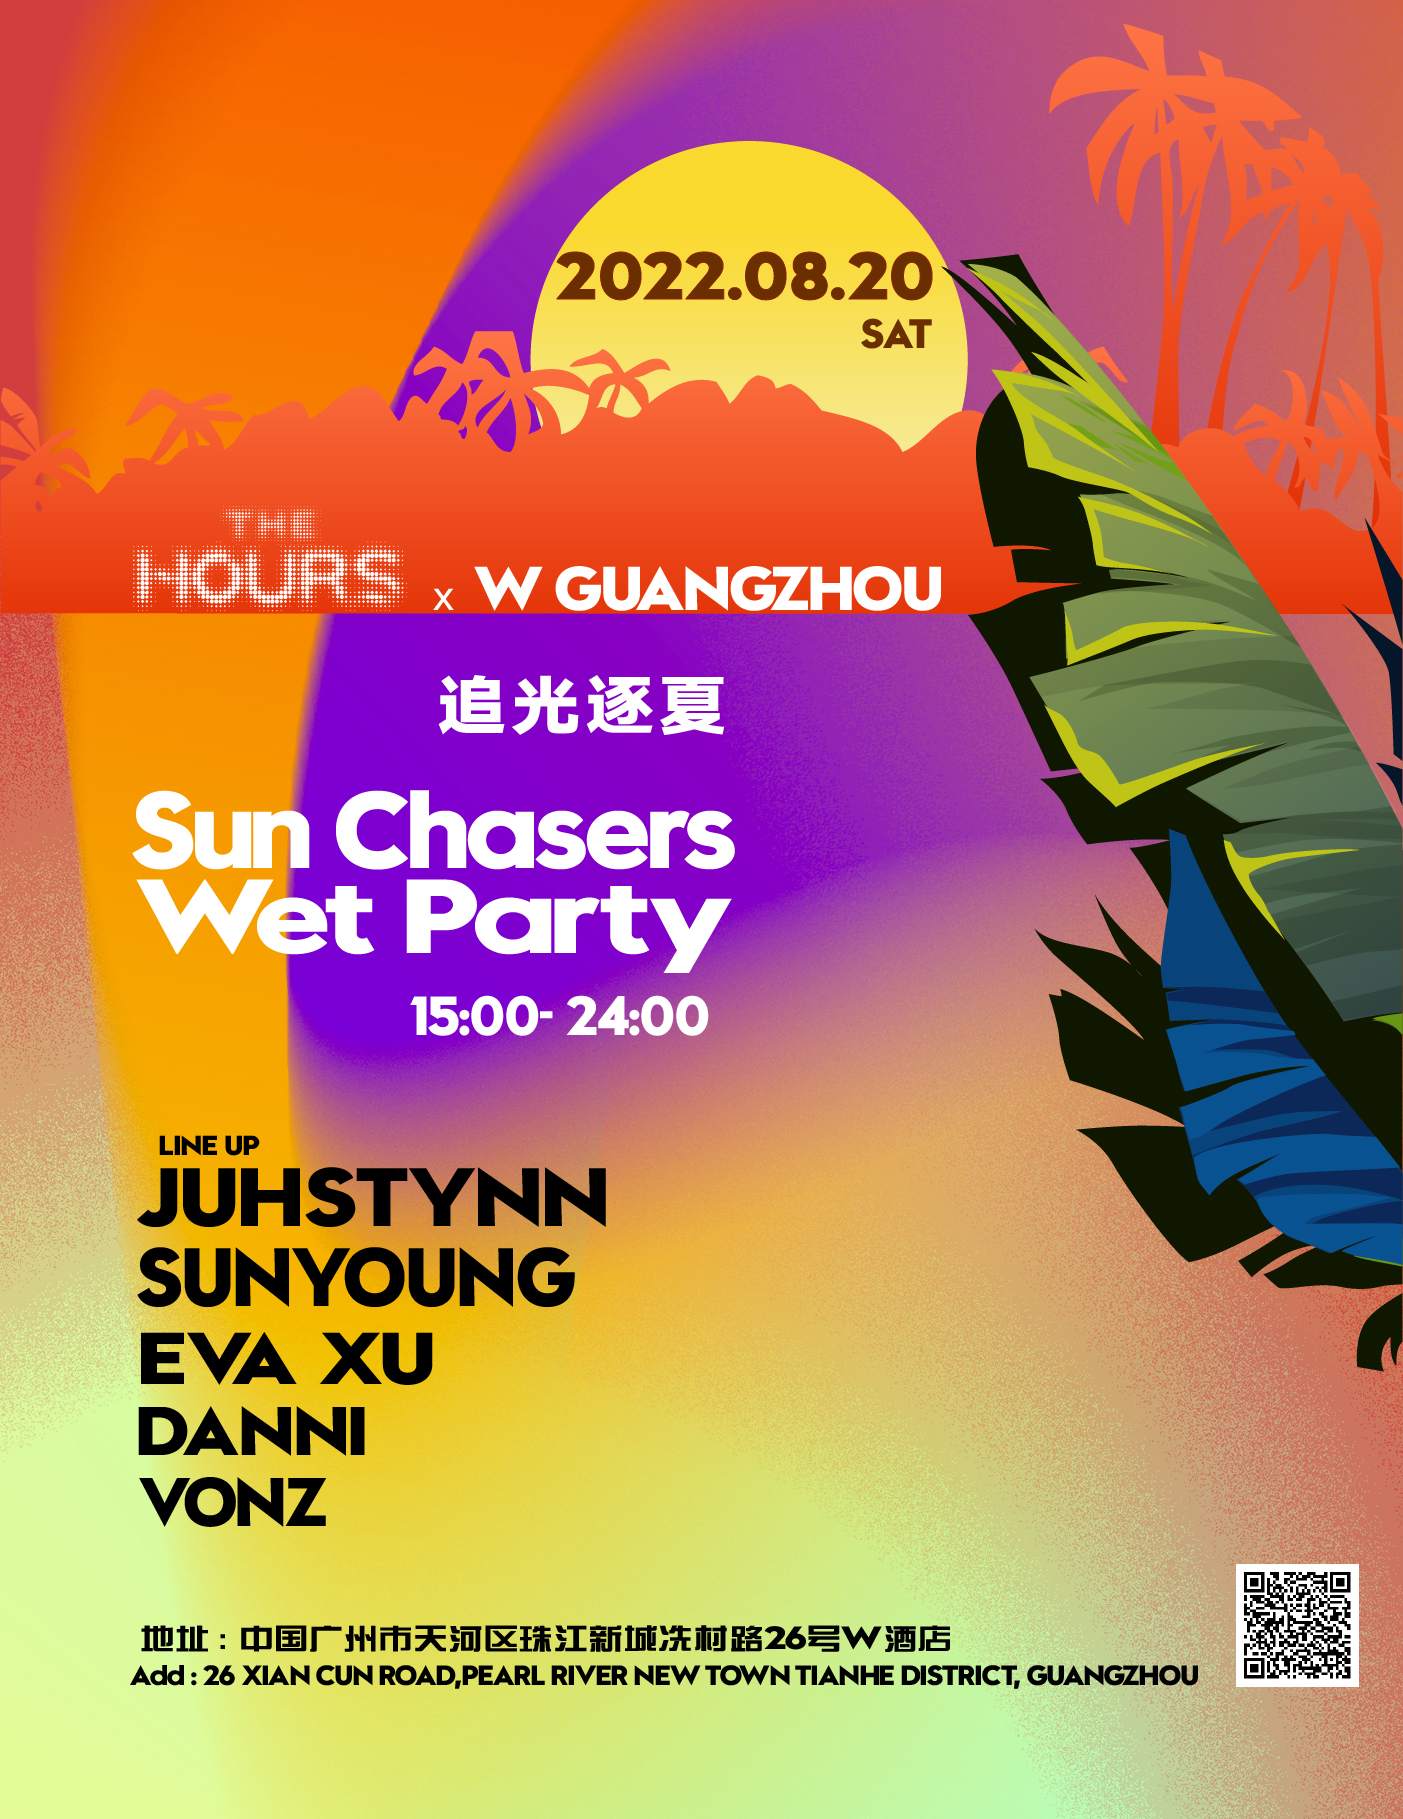 The Hours X W Guangzhou: Sun Charsers Wet Party - フライヤー裏